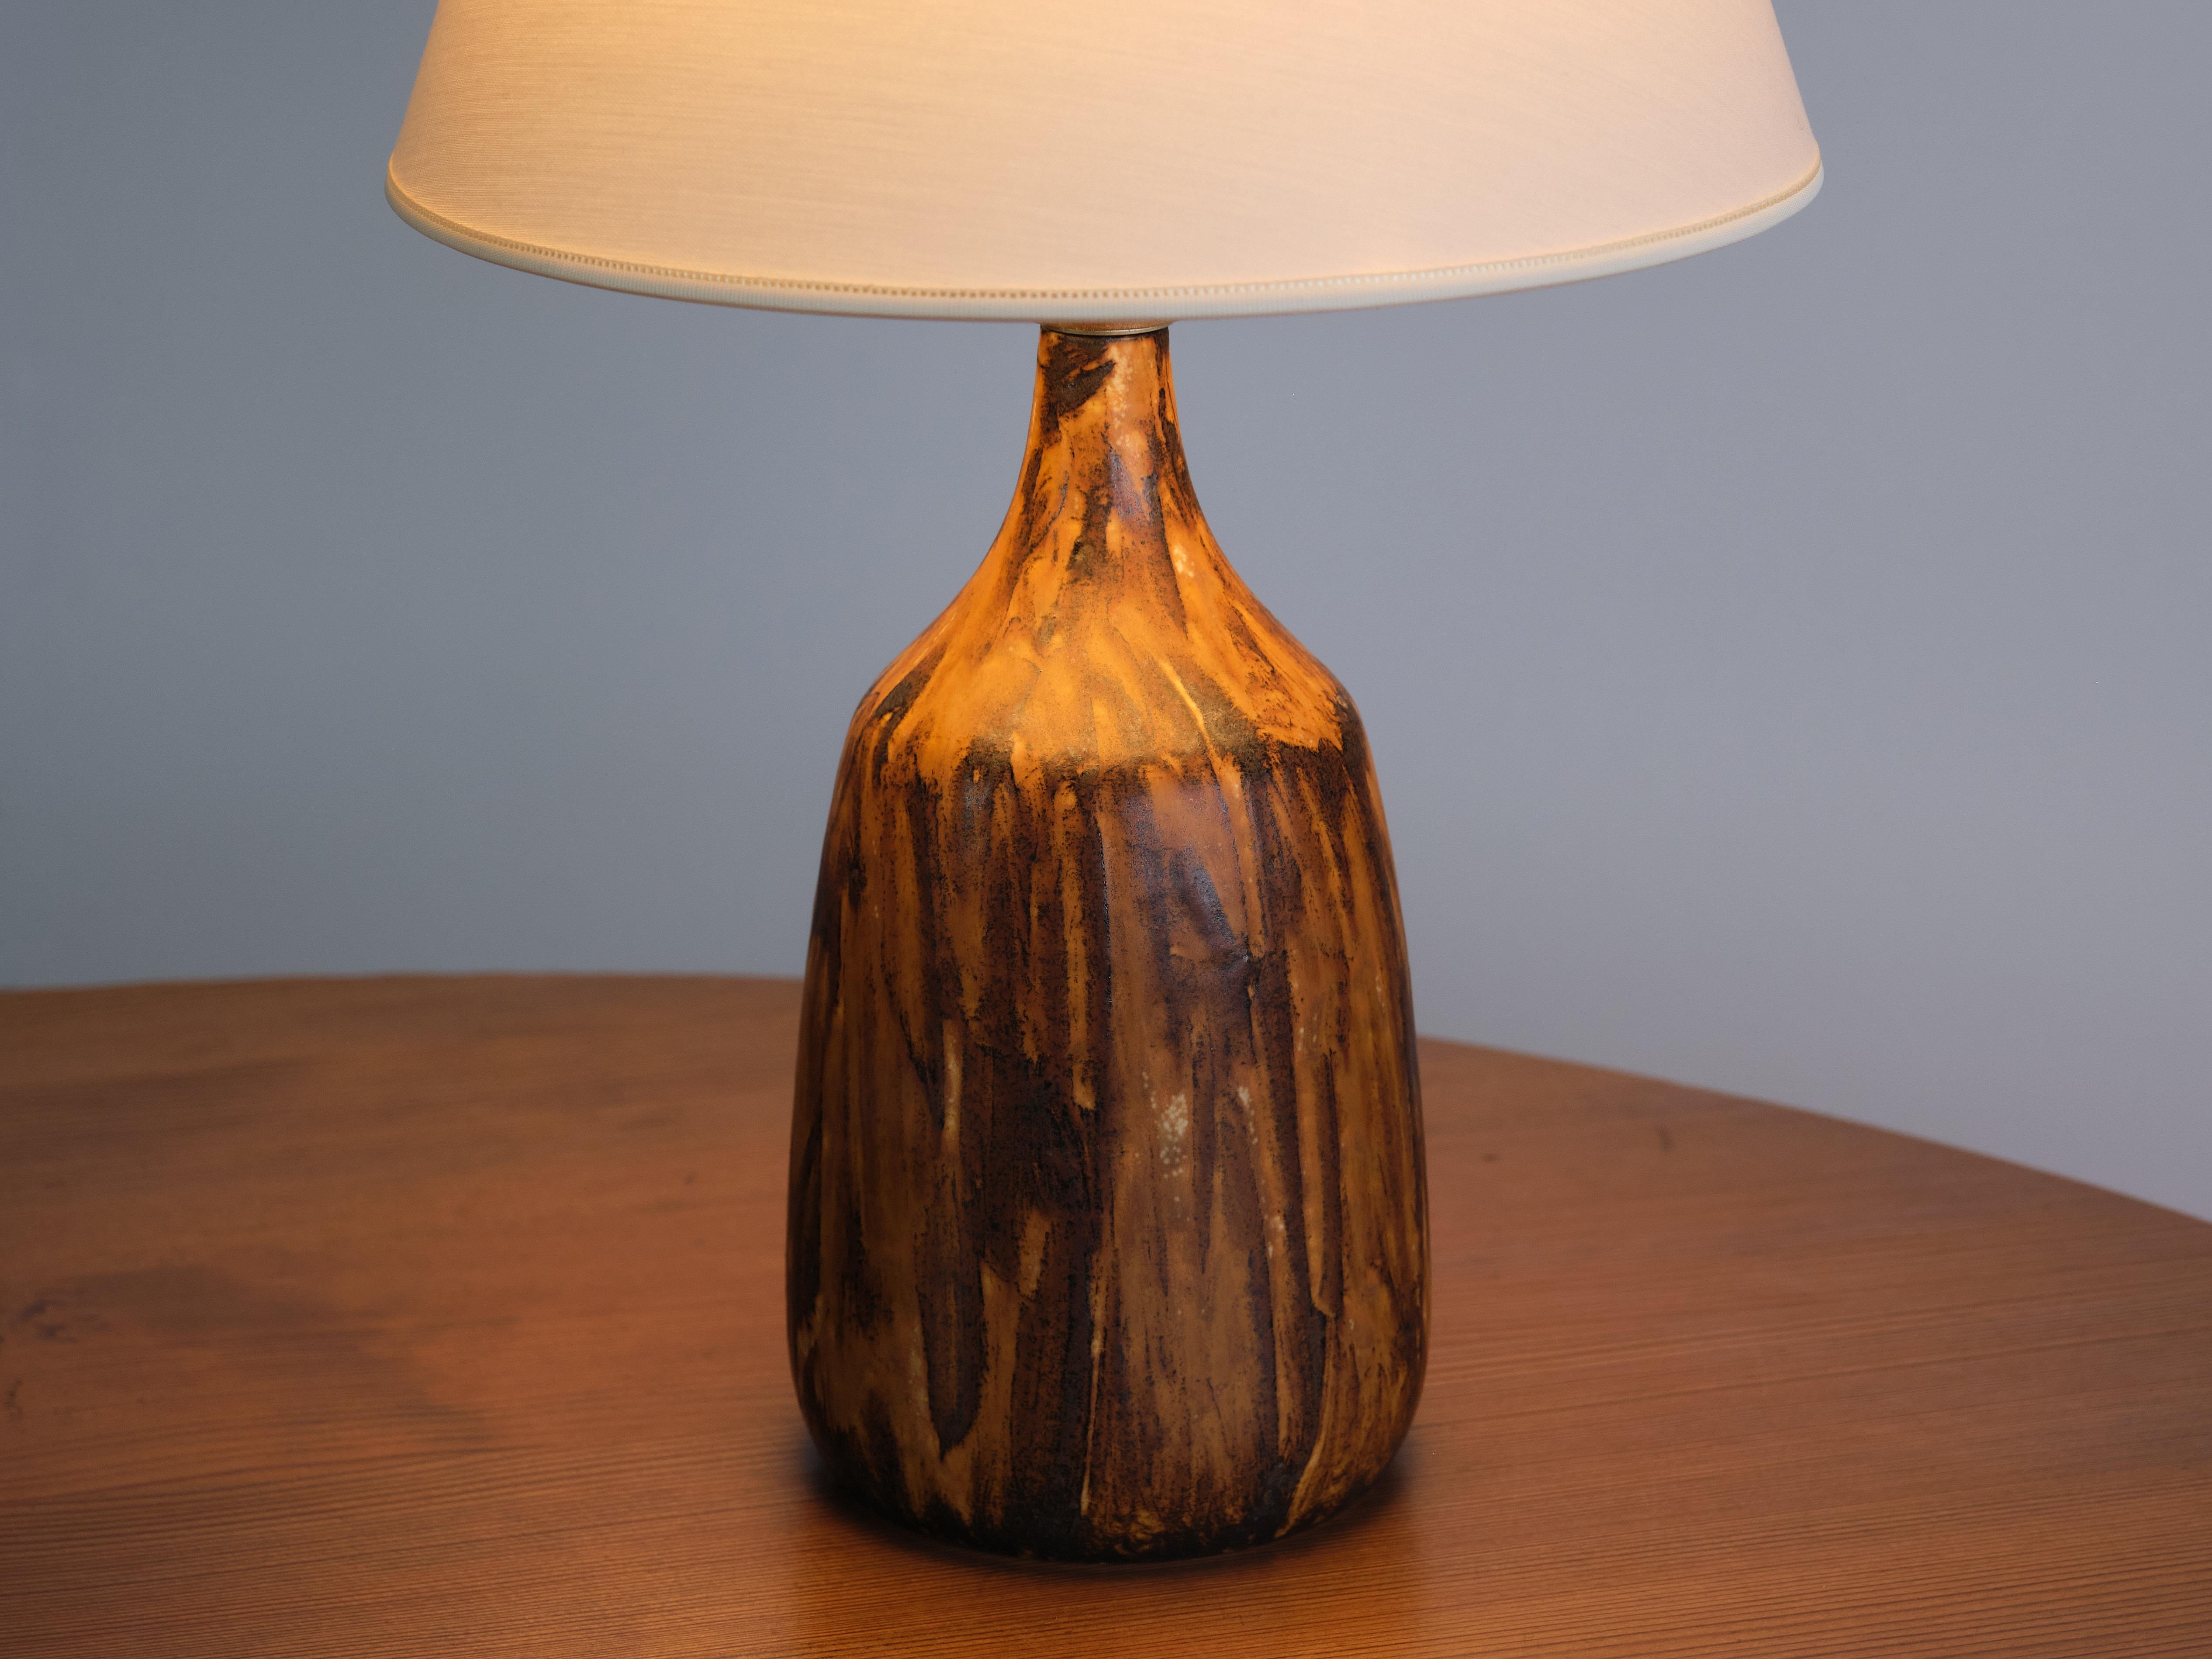 Pair of Gunnar Borg Glazed Stoneware Table Lamps, Höganäs, Sweden, 1960s For Sale 4